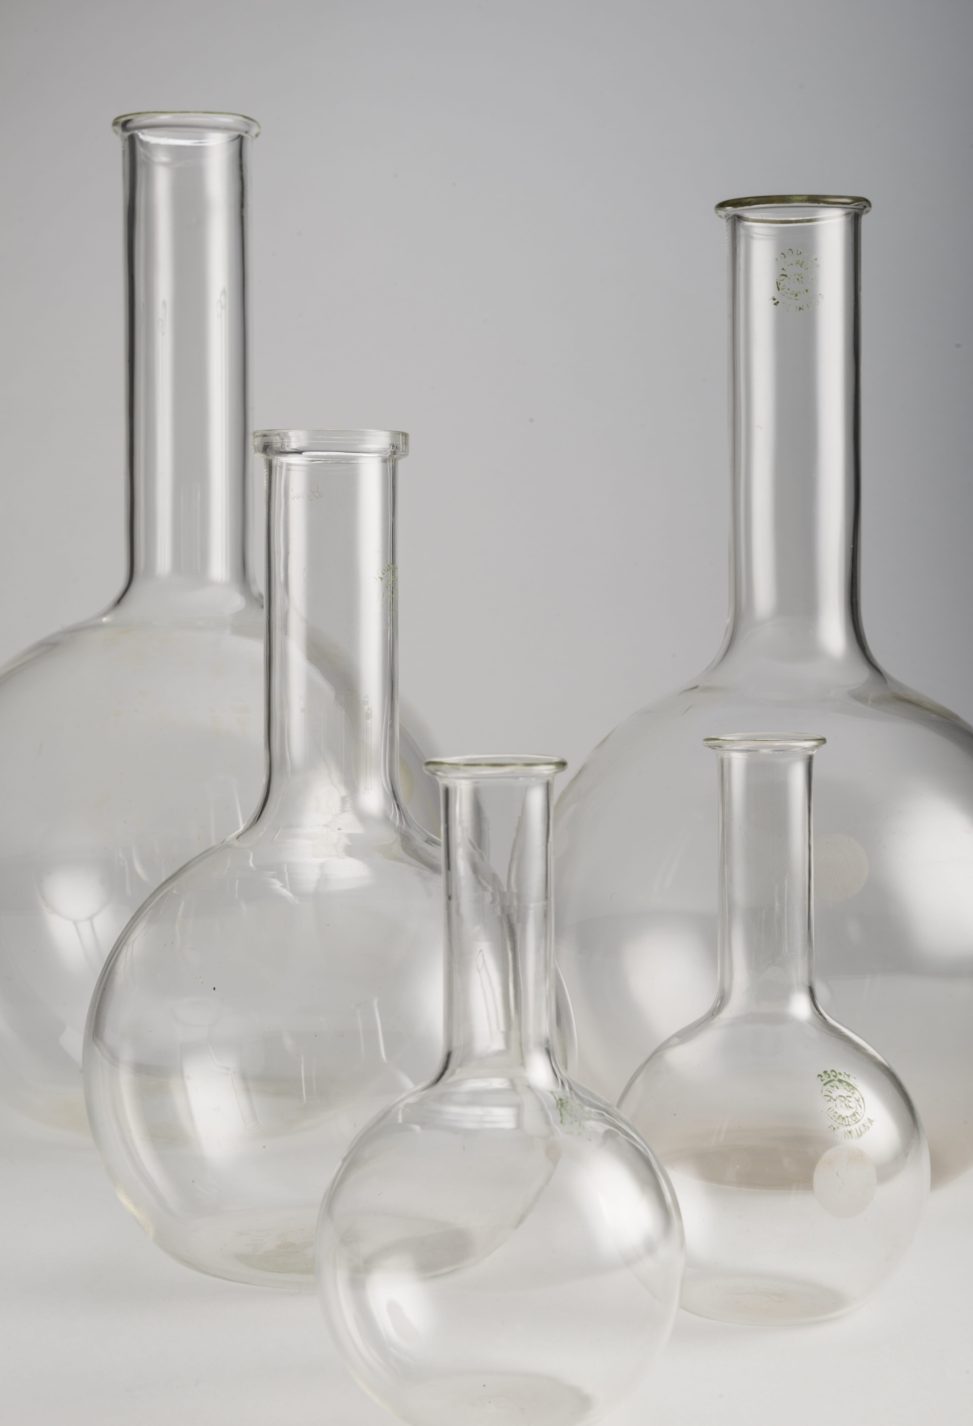 Five laboratory boiling flasks, each in transparent glass with a spherical bottom and a cylindrical spout. There are two 250mL flasks and one each of 1Litre, 2Litres, and 3Litres.